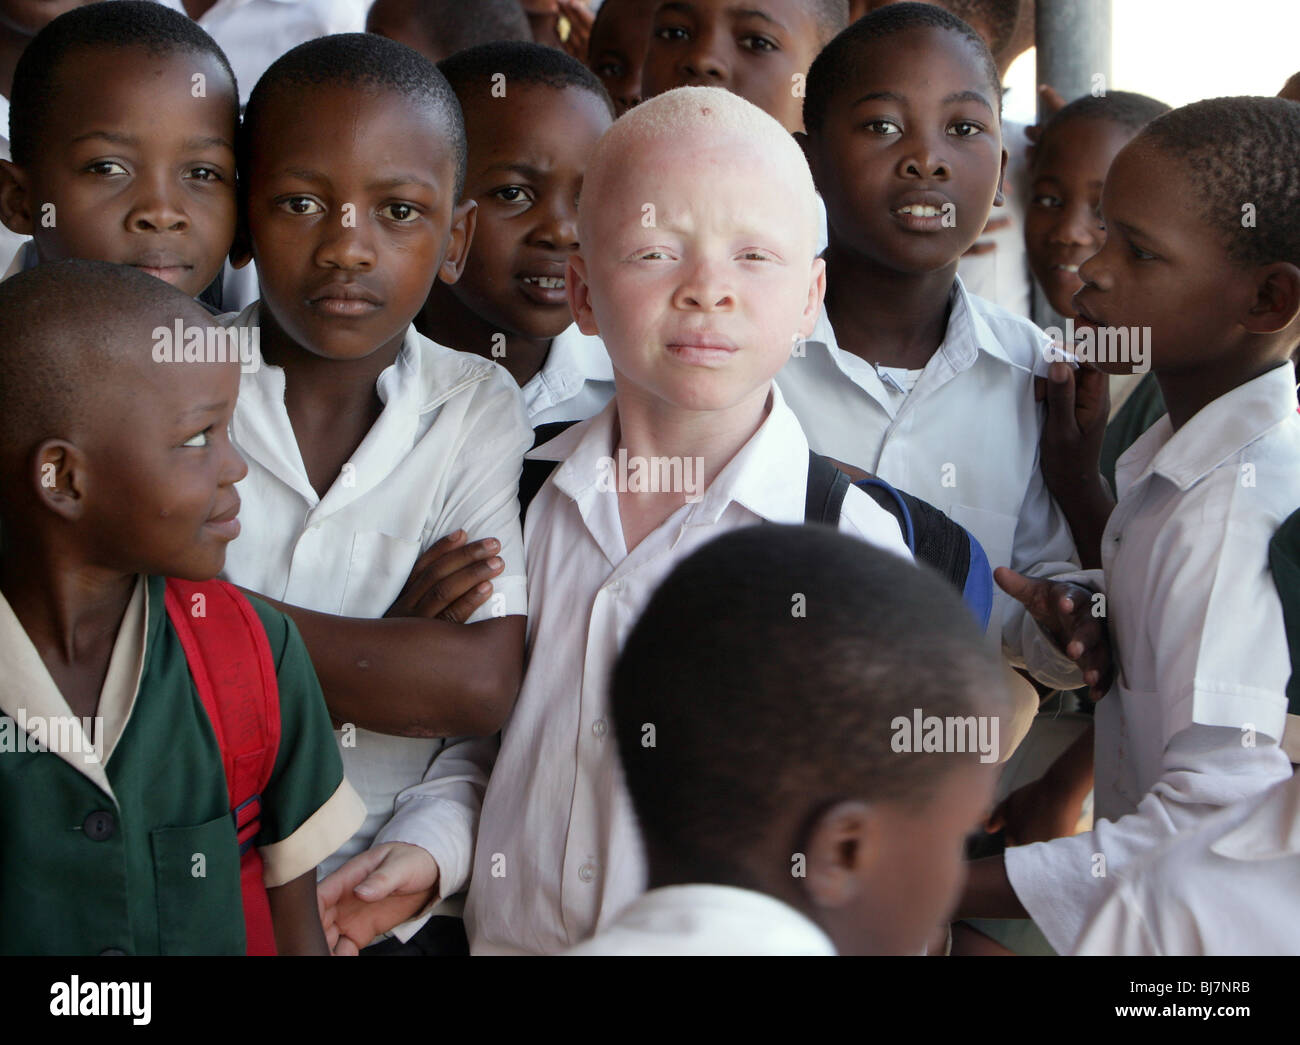 Albino boy with black pupils in a school in Mariannhill, South Africa. In Africa, prosecution of albinos is not uncommon Stock Photo